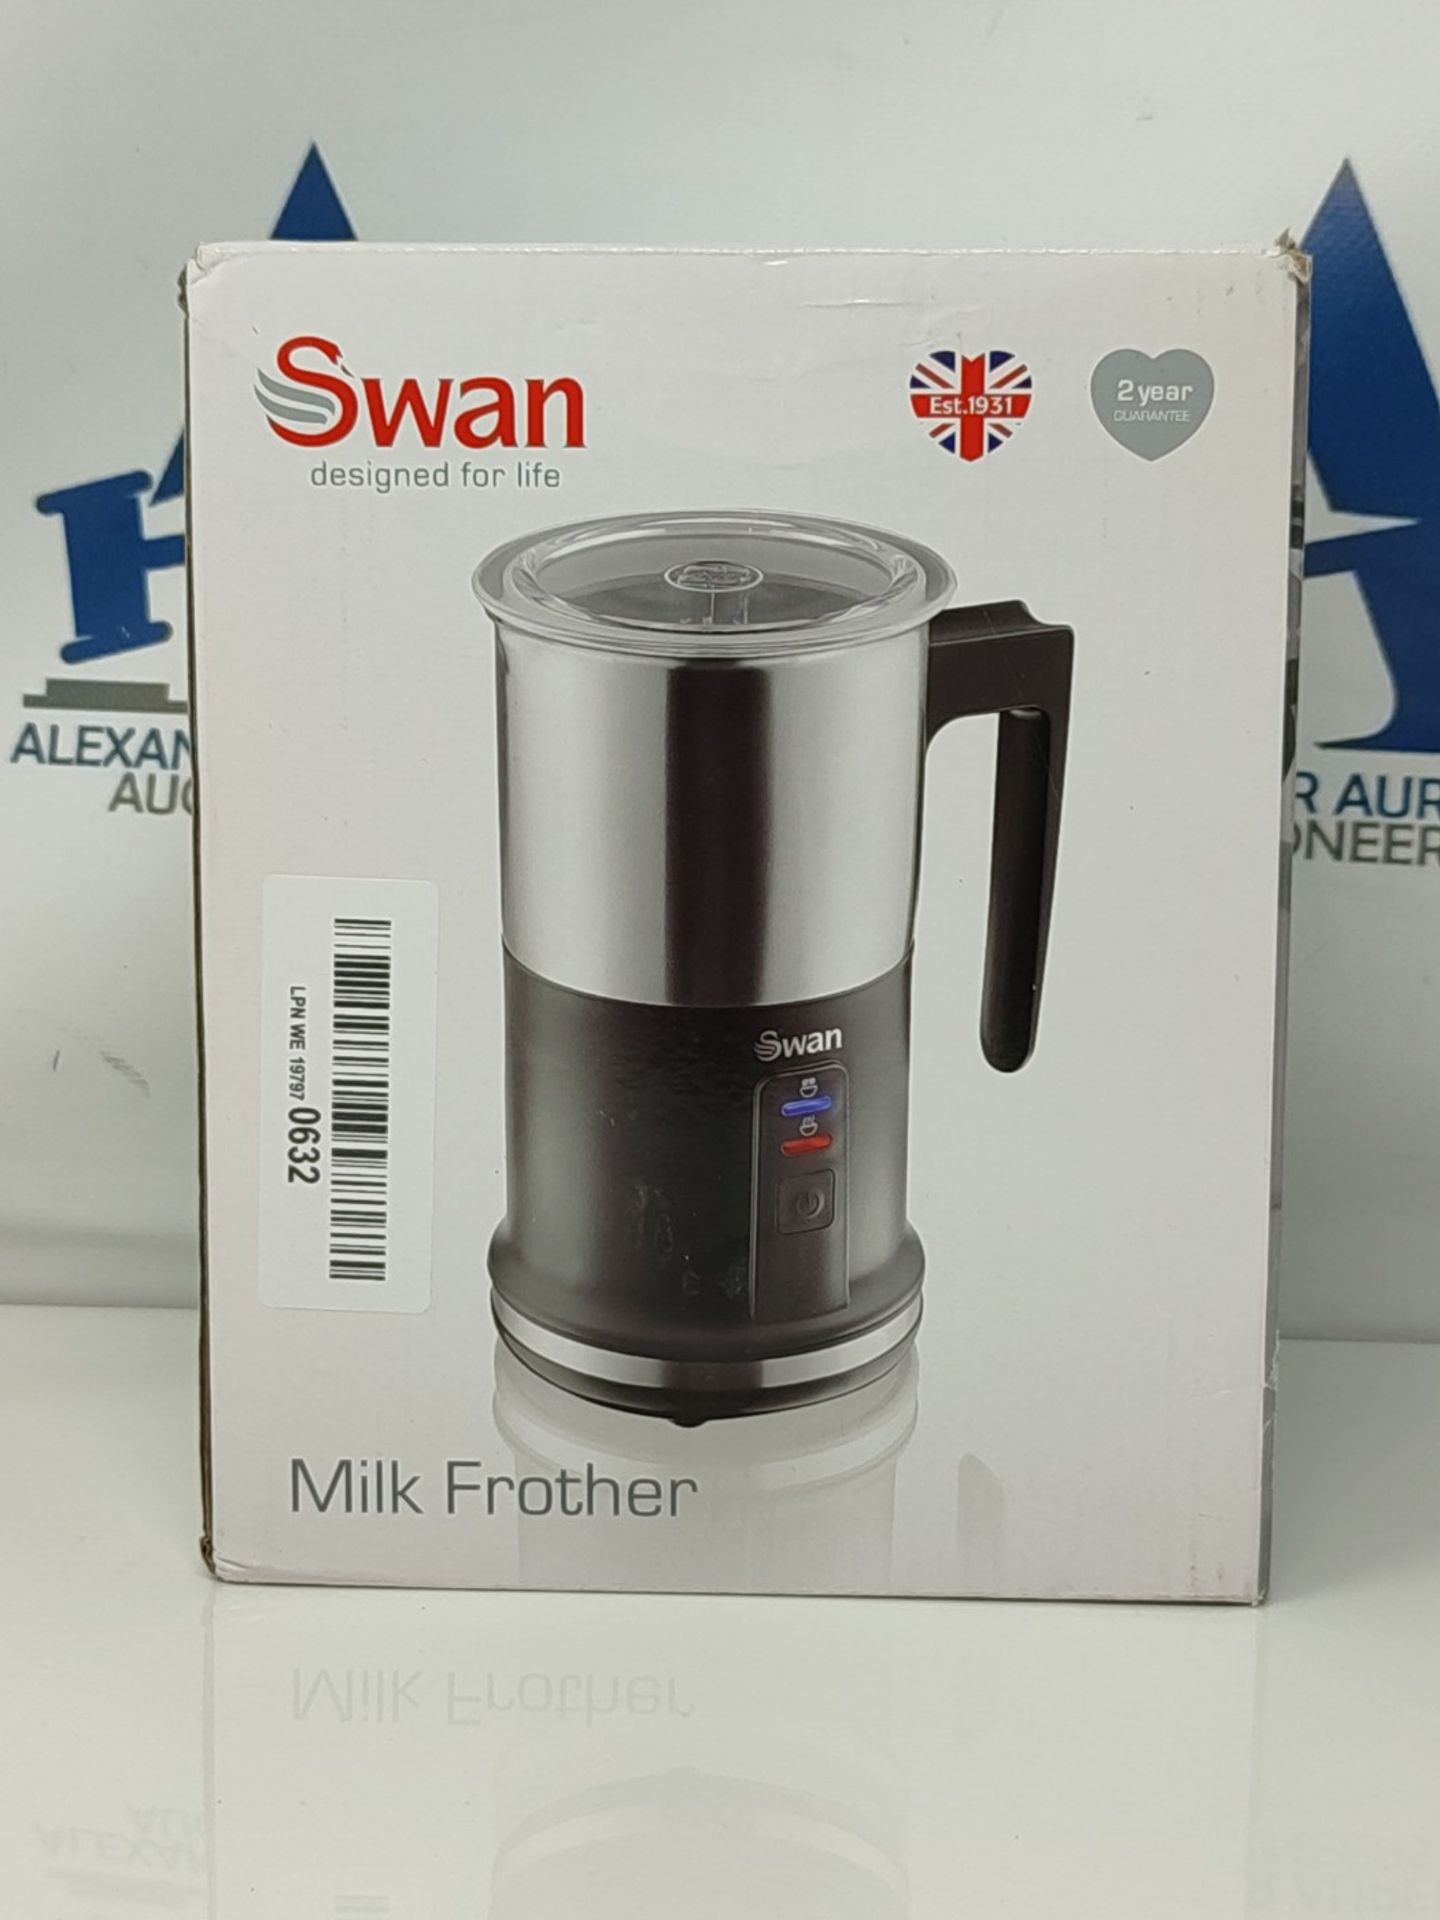 Swan, Automatic Milk Frother and Warmer, 2 Layer Non-Stick Coating, 500W, 500 W, Black - Bild 2 aus 3